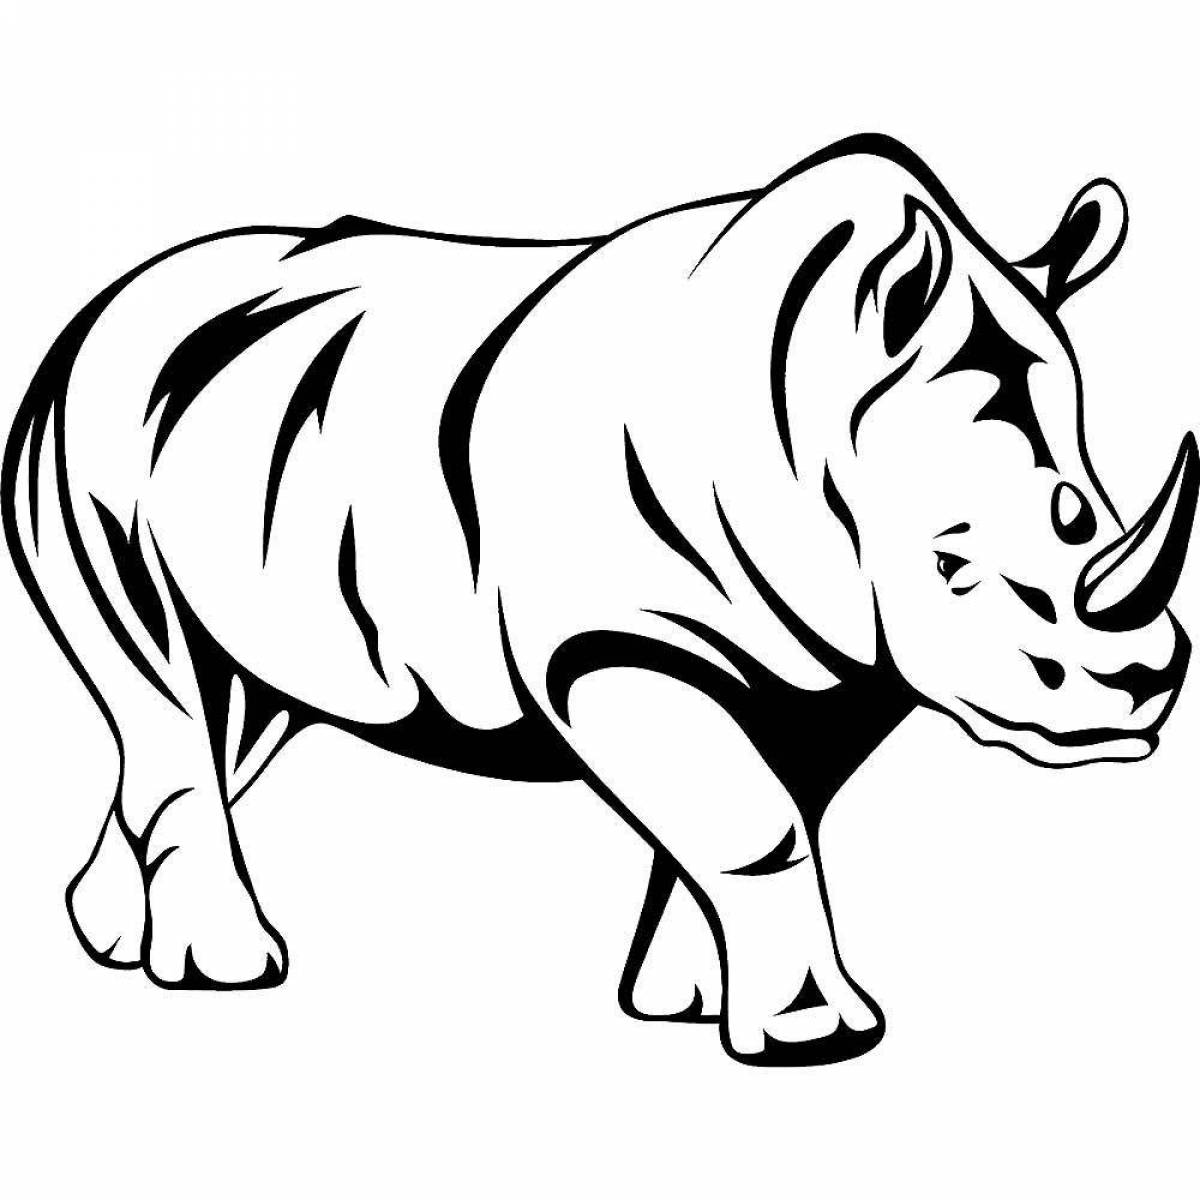 Cute rhinoceros coloring pages for kids